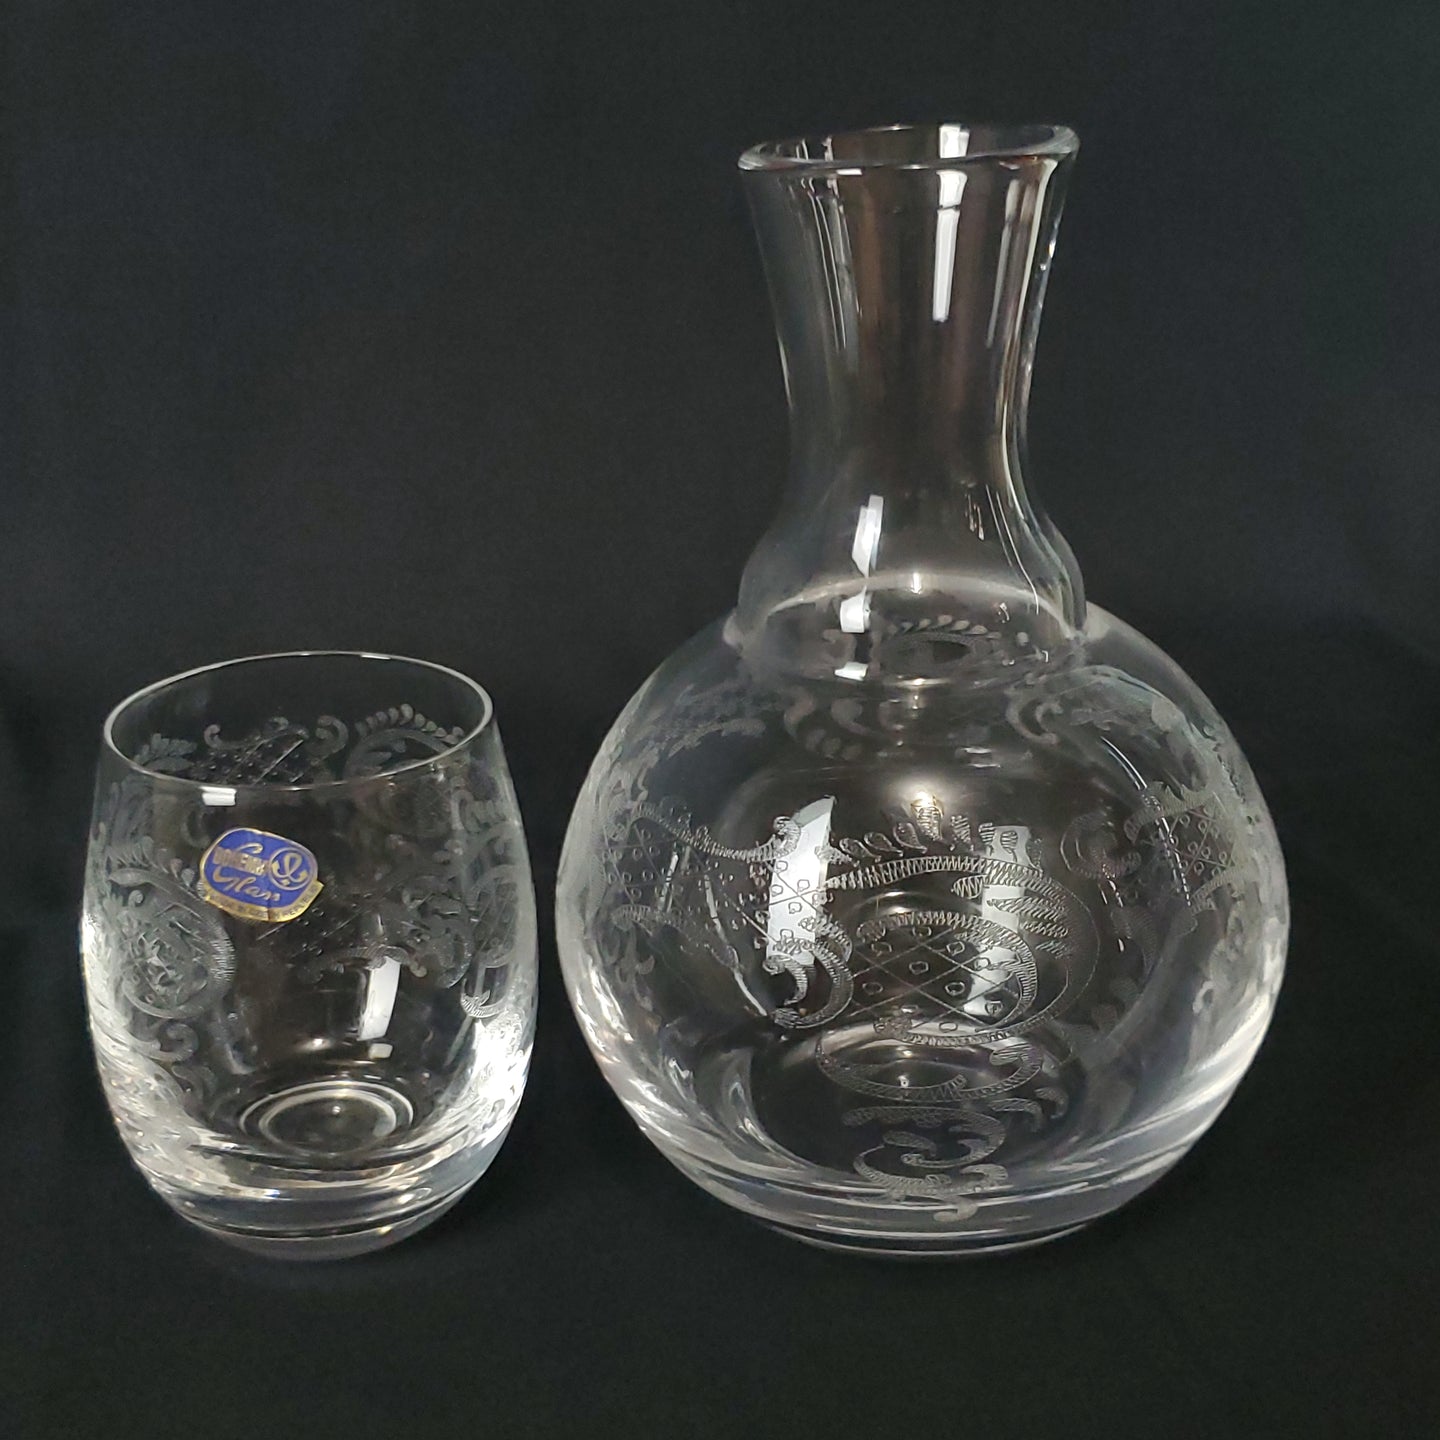 Bohemia Czech Etched Glass Decanter & Matching Glass